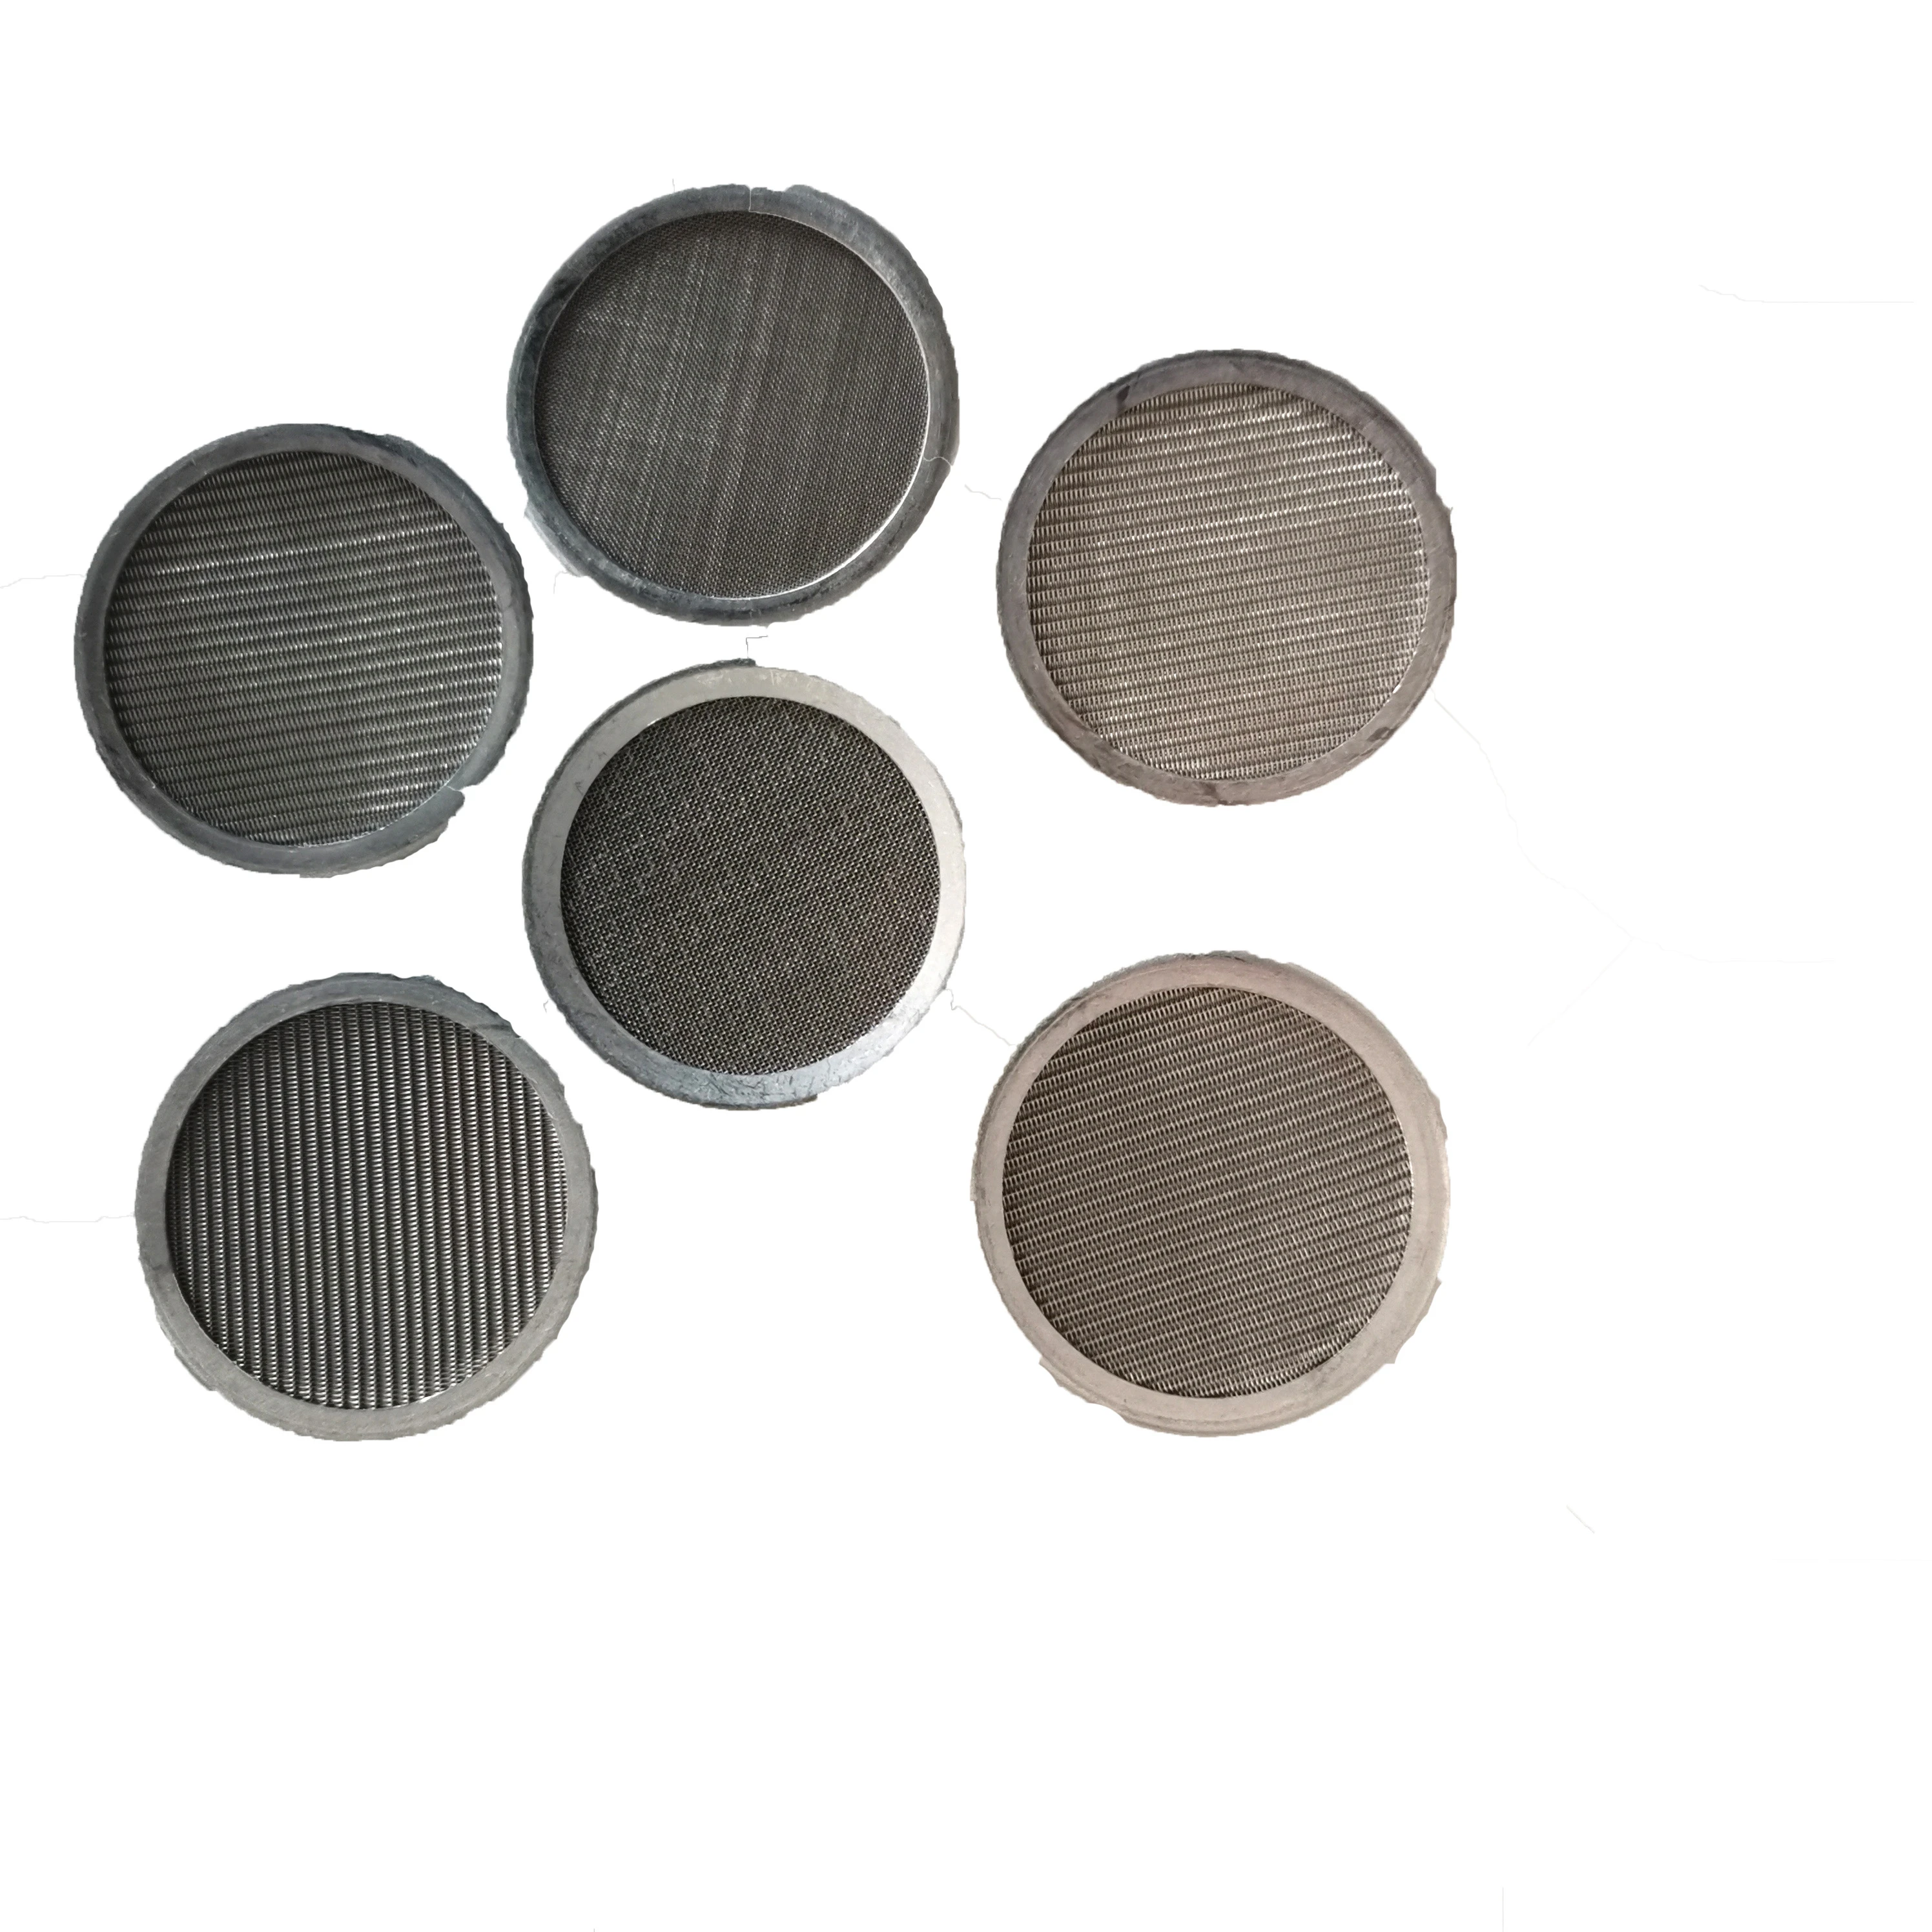 High quality 300 mesh stainless steel filter screen stainless steel filter plate, dust removal mesh cylinder